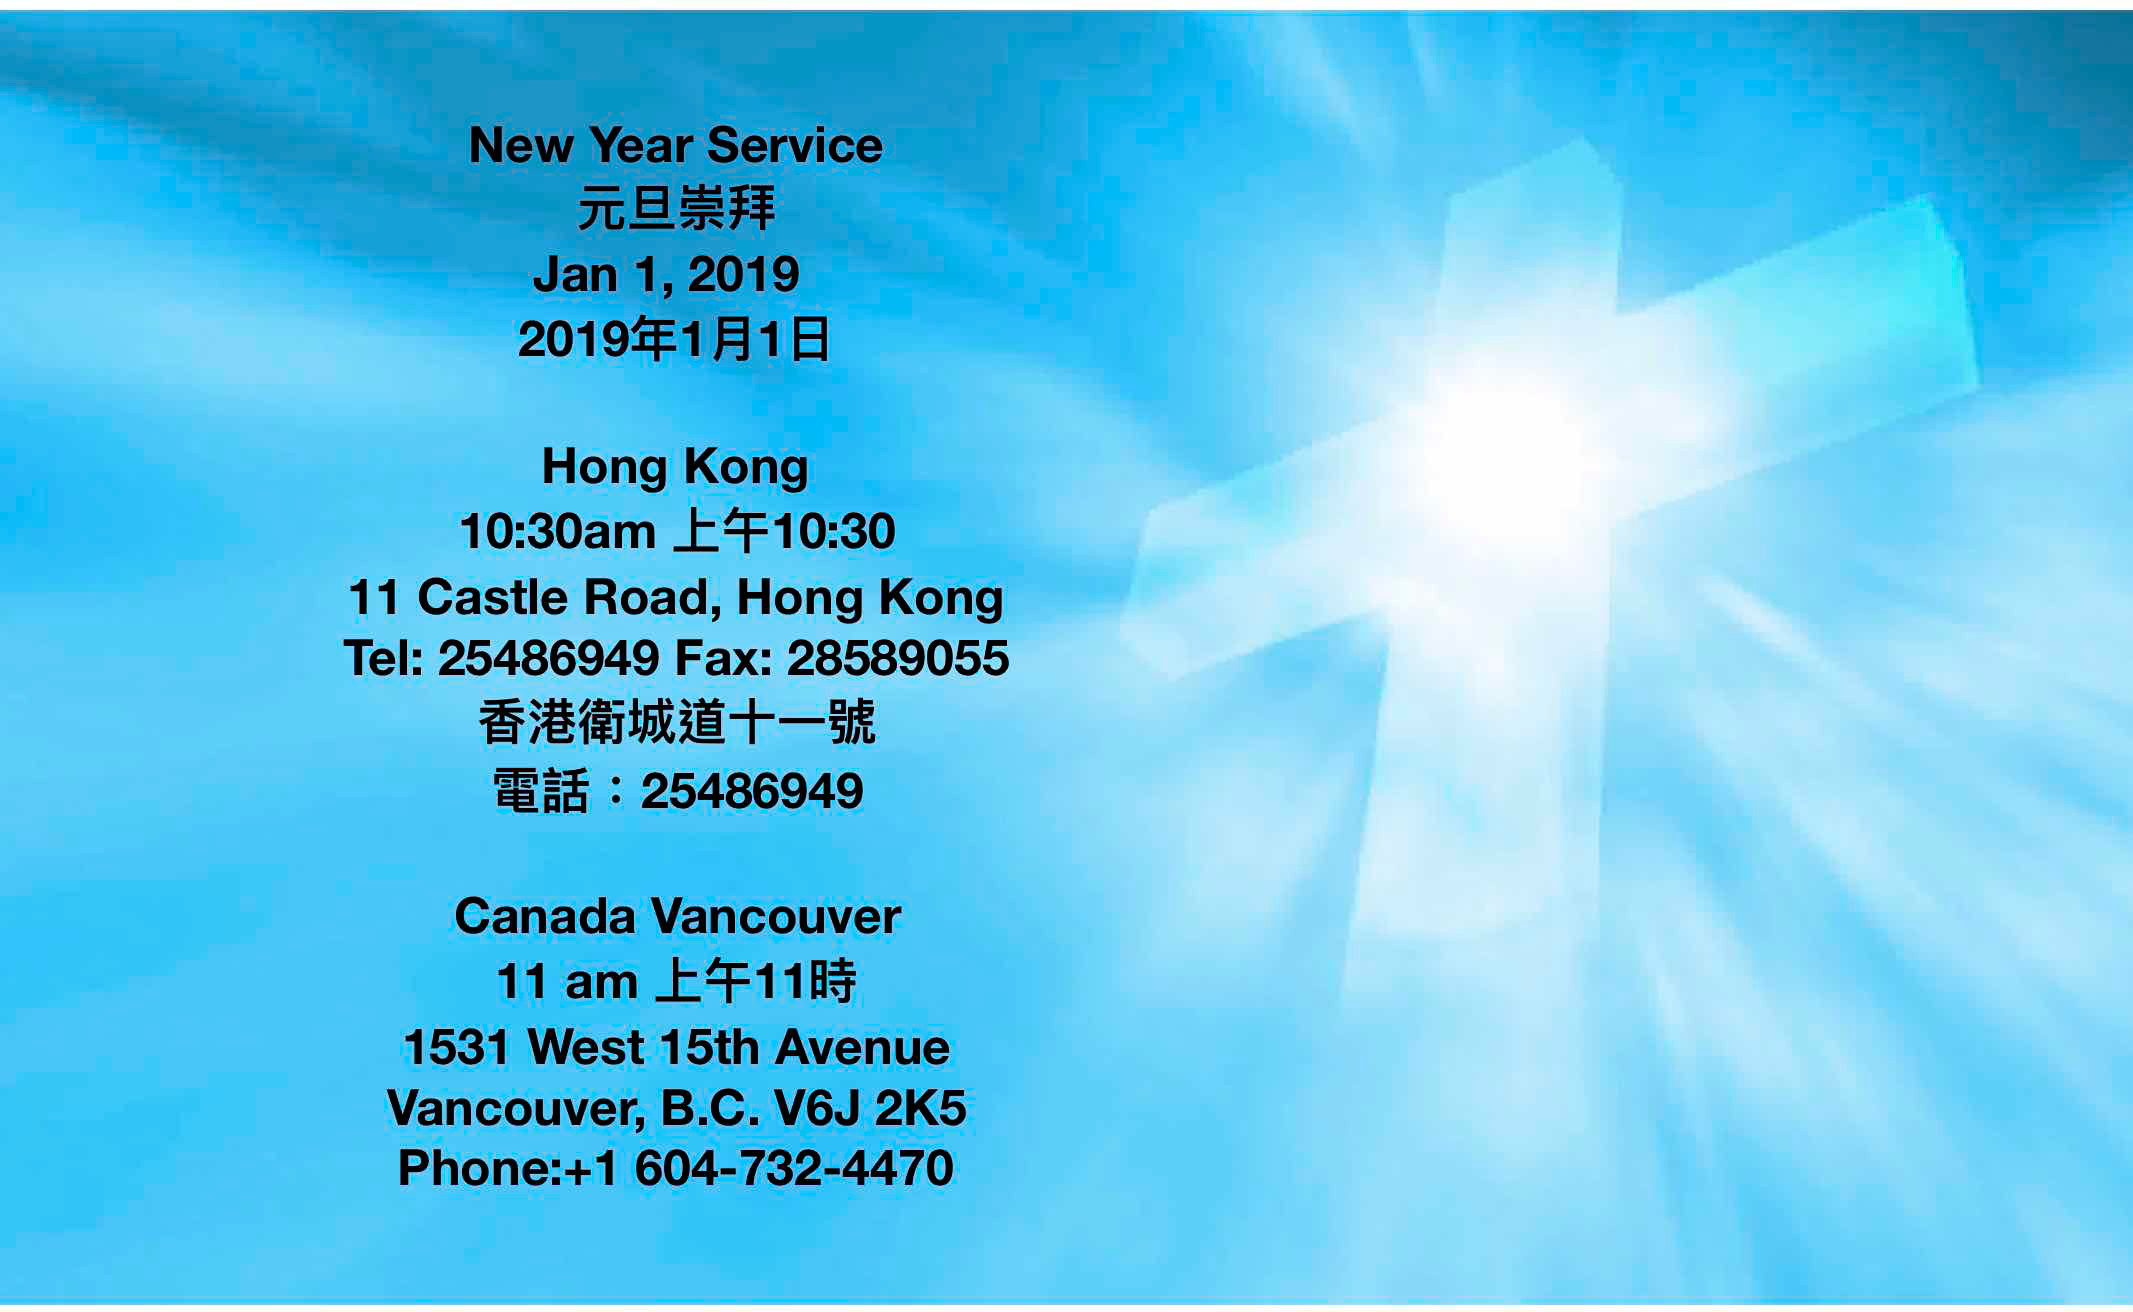 New Year Services 2019